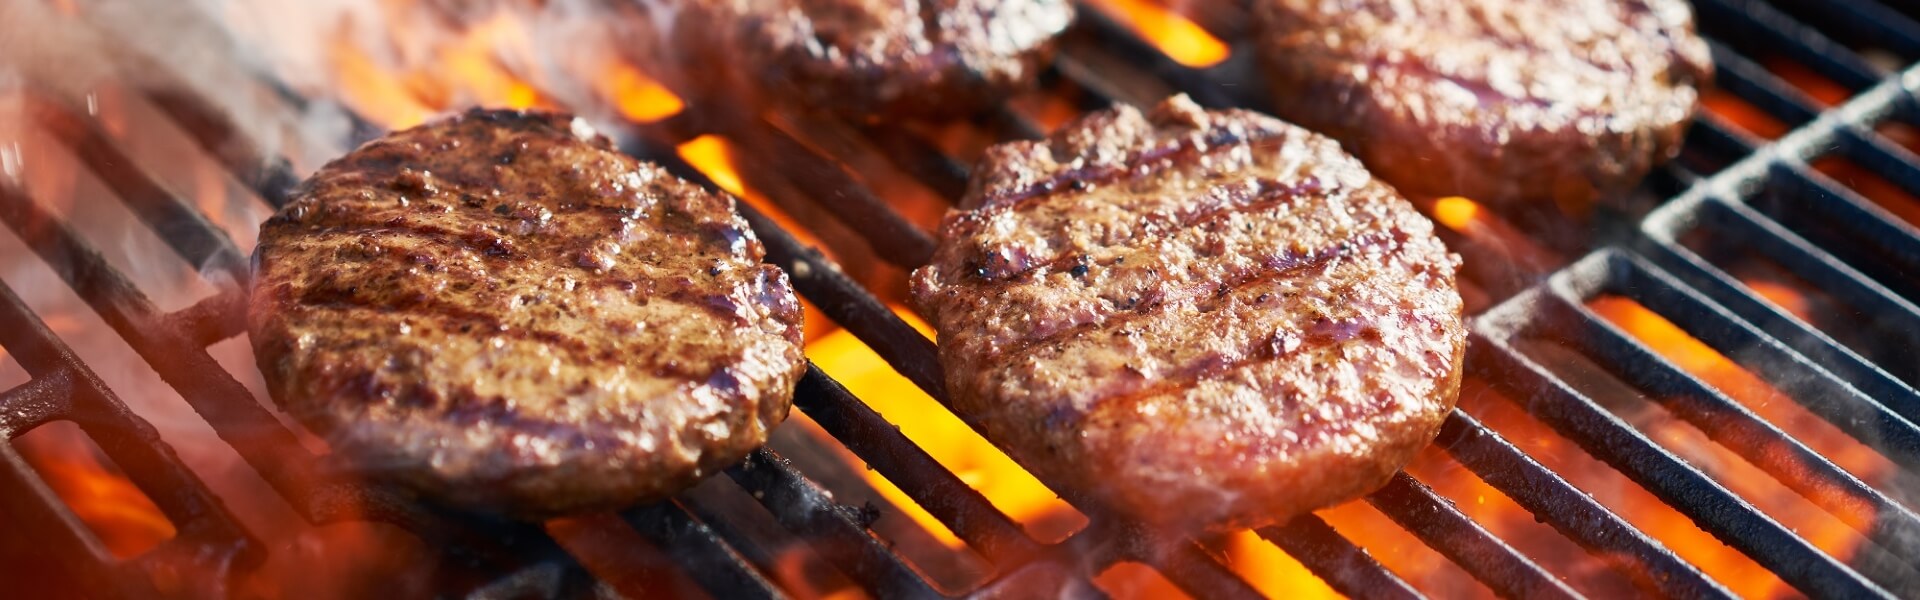 How to Grill Frozen Burgers